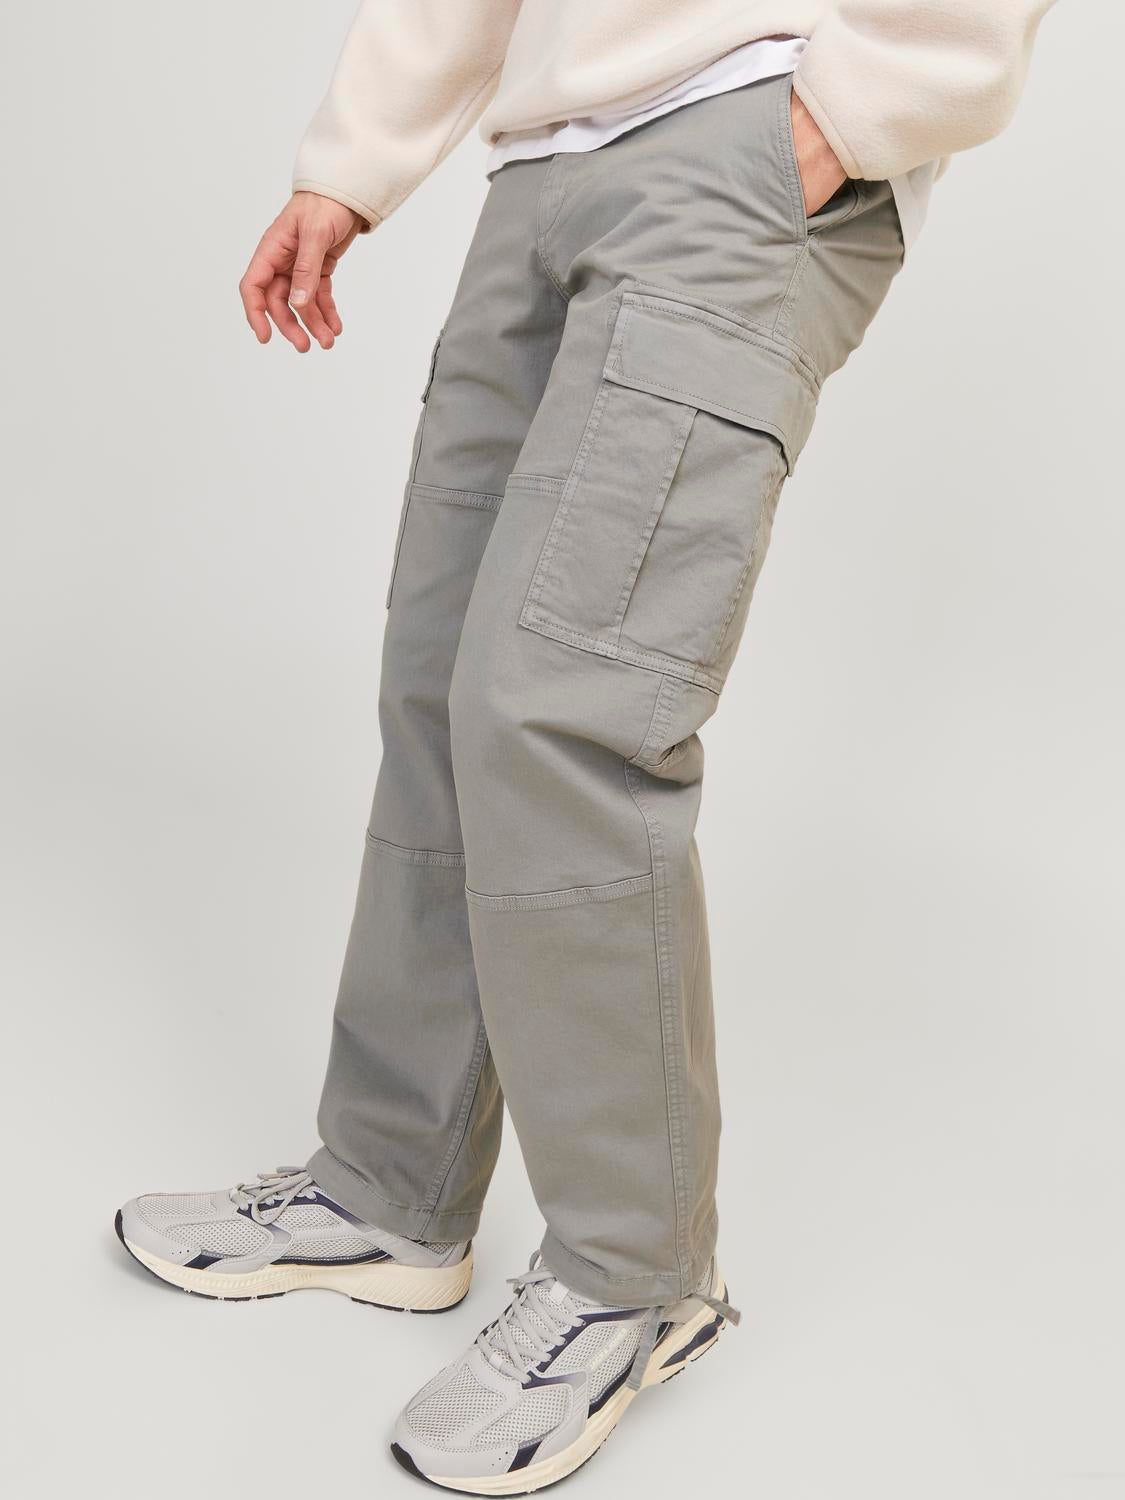 2022 Mens Relaxed Fit Cargo Trousers Hip Hop Style, Loose Fit, Harajuku  Style With Multi Pockets, Elastic Waist, And Techwear For Men And Women  From Luxurious66, $28.43 | DHgate.Com